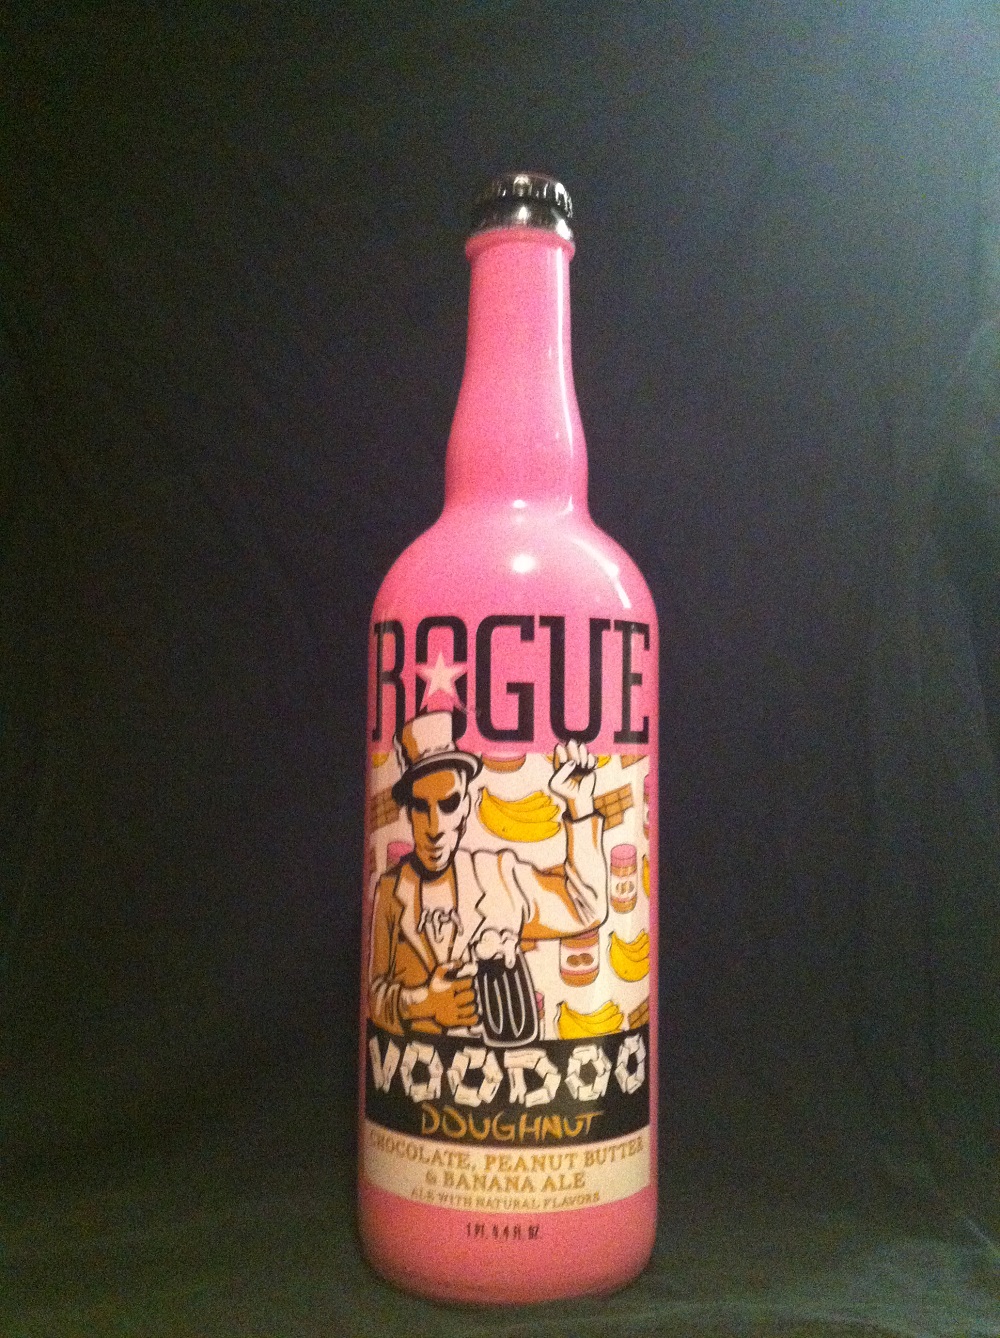 Rogue Ale's: All The Sweet Stuff In One Unusual Ale